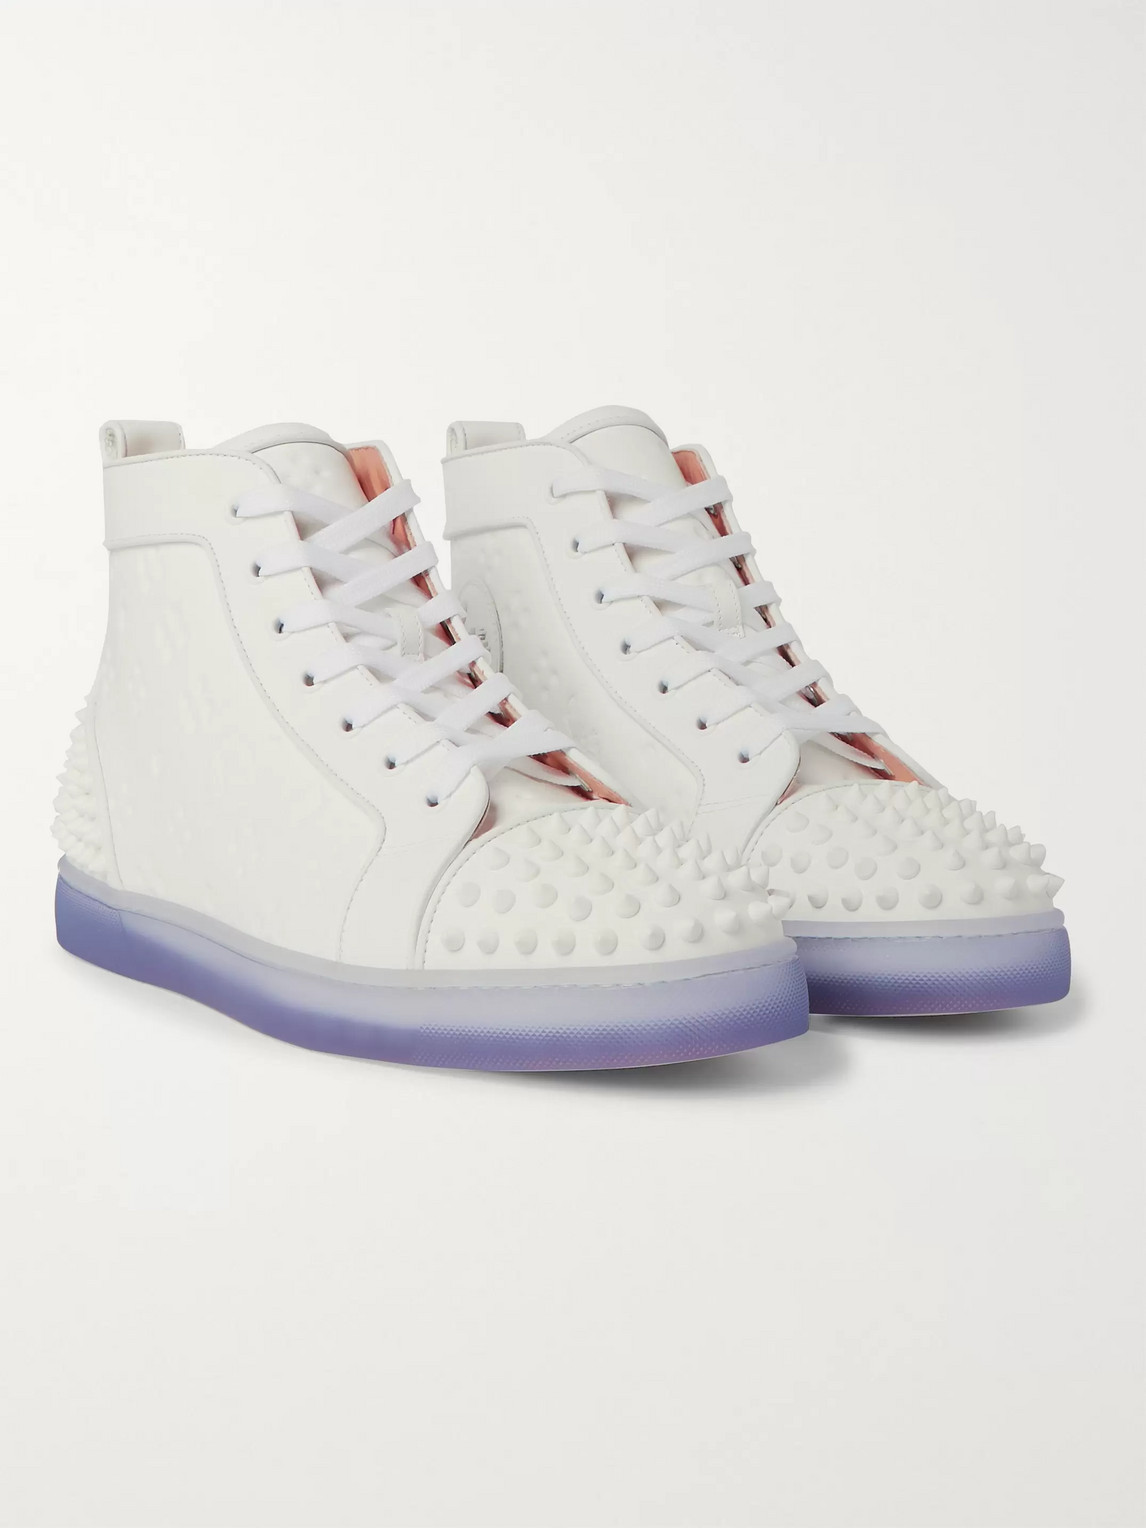 CHRISTIAN LOUBOUTIN LOU SPIKES 2 EMBOSSED LEATHER HIGH-TOP trainers